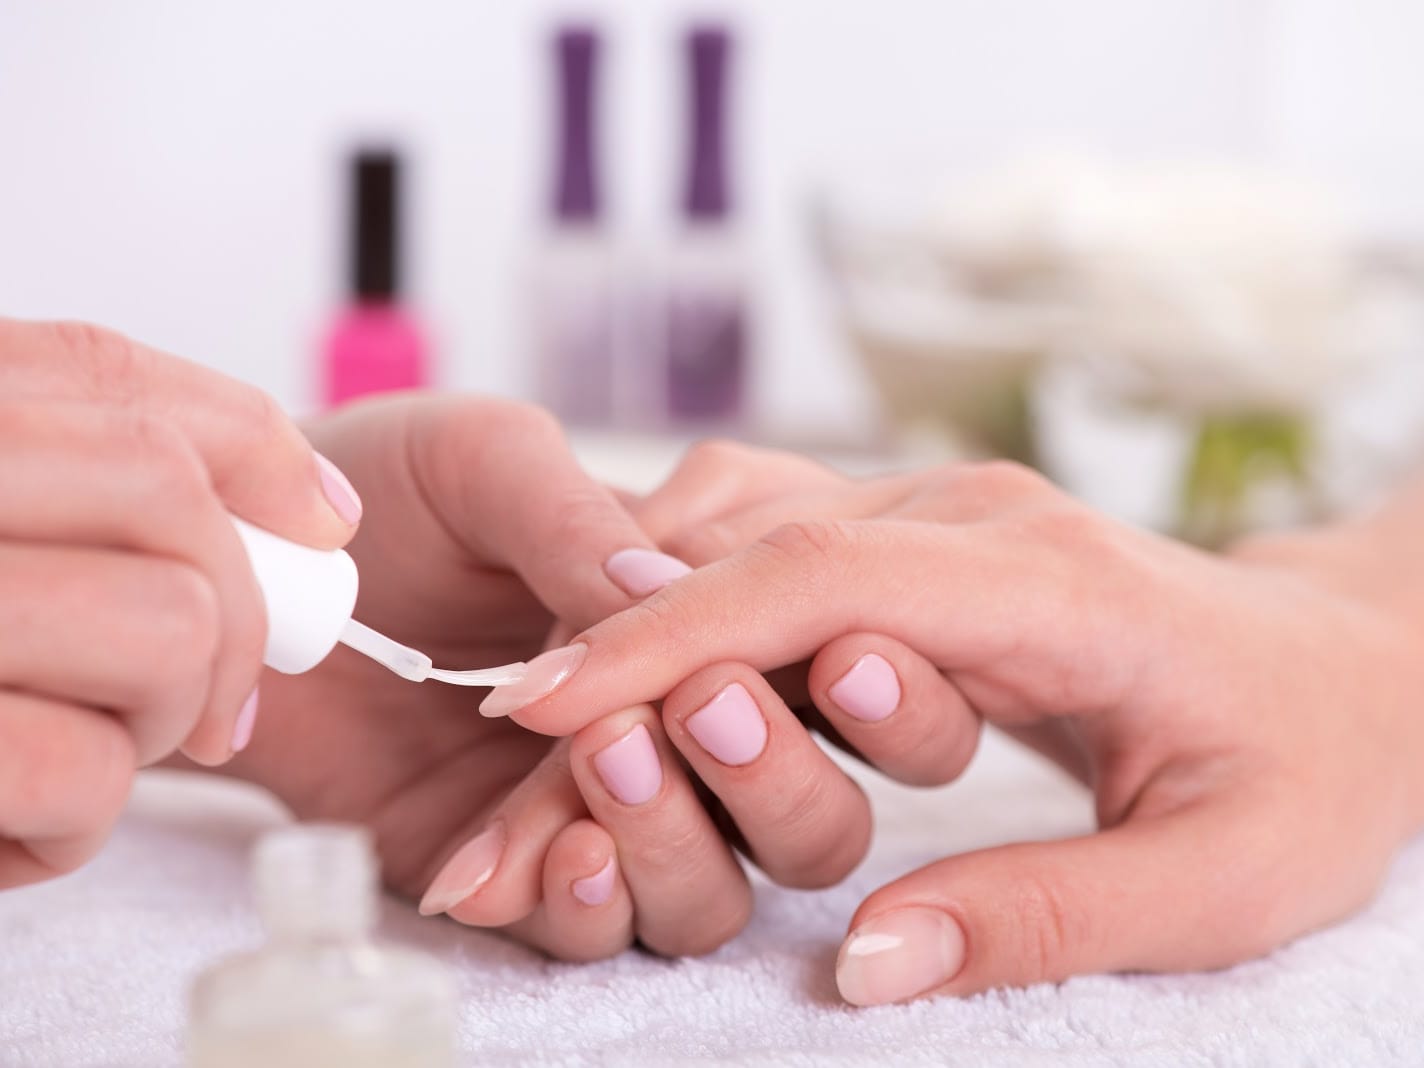 Classic Mani - Pedi with Nail Art (2 Sessions) at Specialist Nail & Beauty Spa - Get Deals, Cashback and Rewards with ShopBack GO